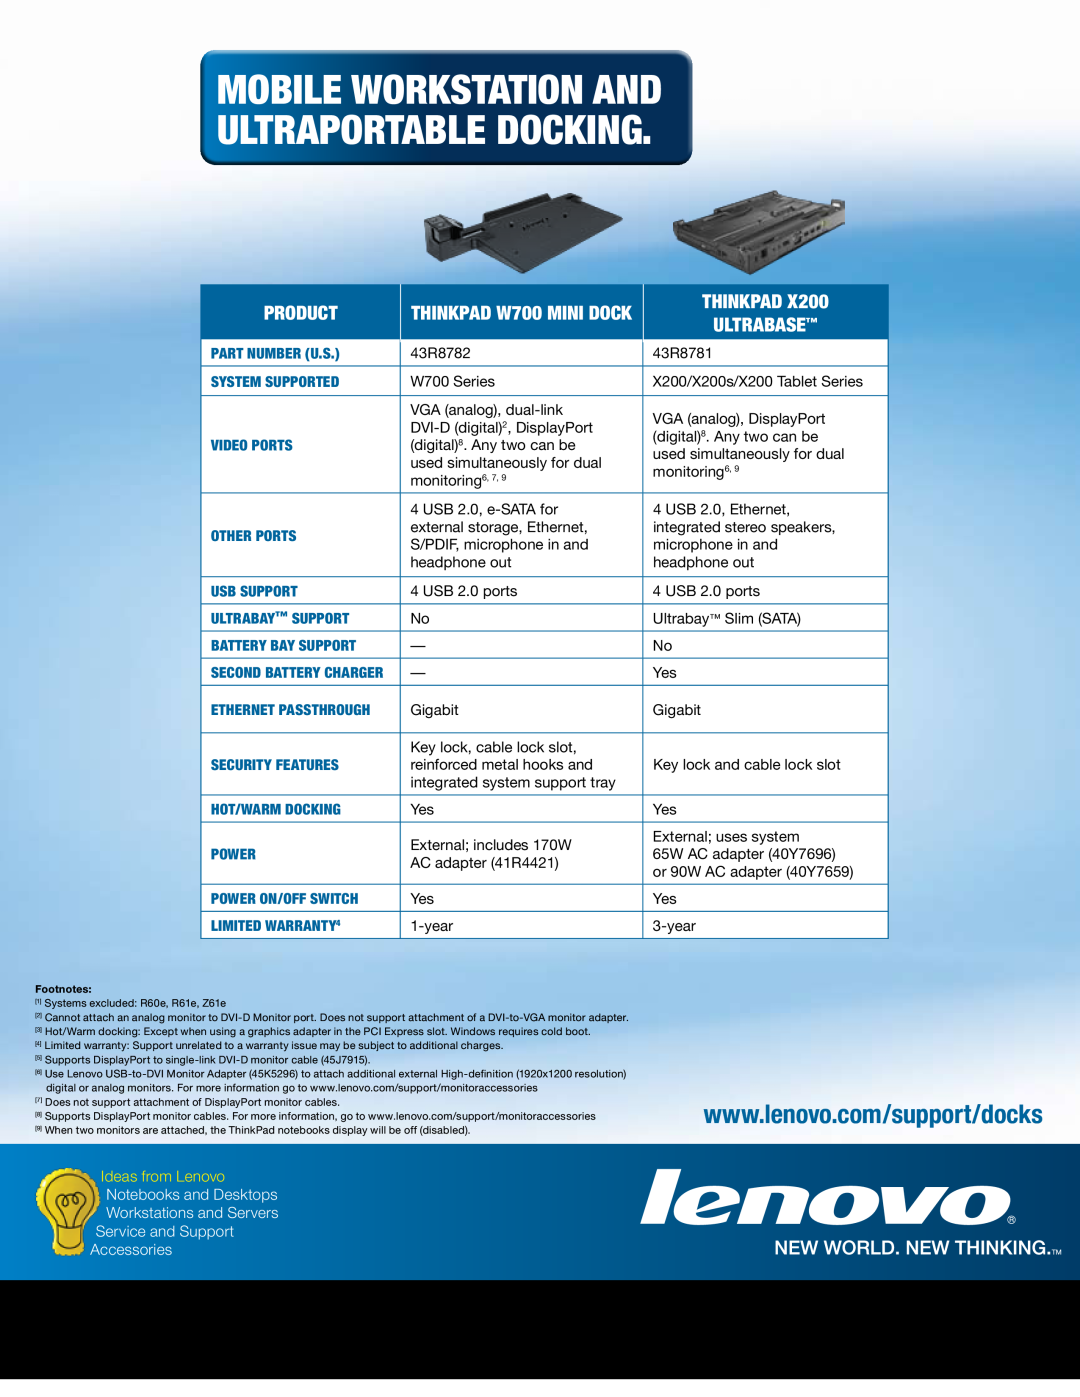 Lenovo 250510W UltraBase, Mobile Workstation And Ultraportable Docking, Product, ThinkPad W700 Mini Dock, Accessories 